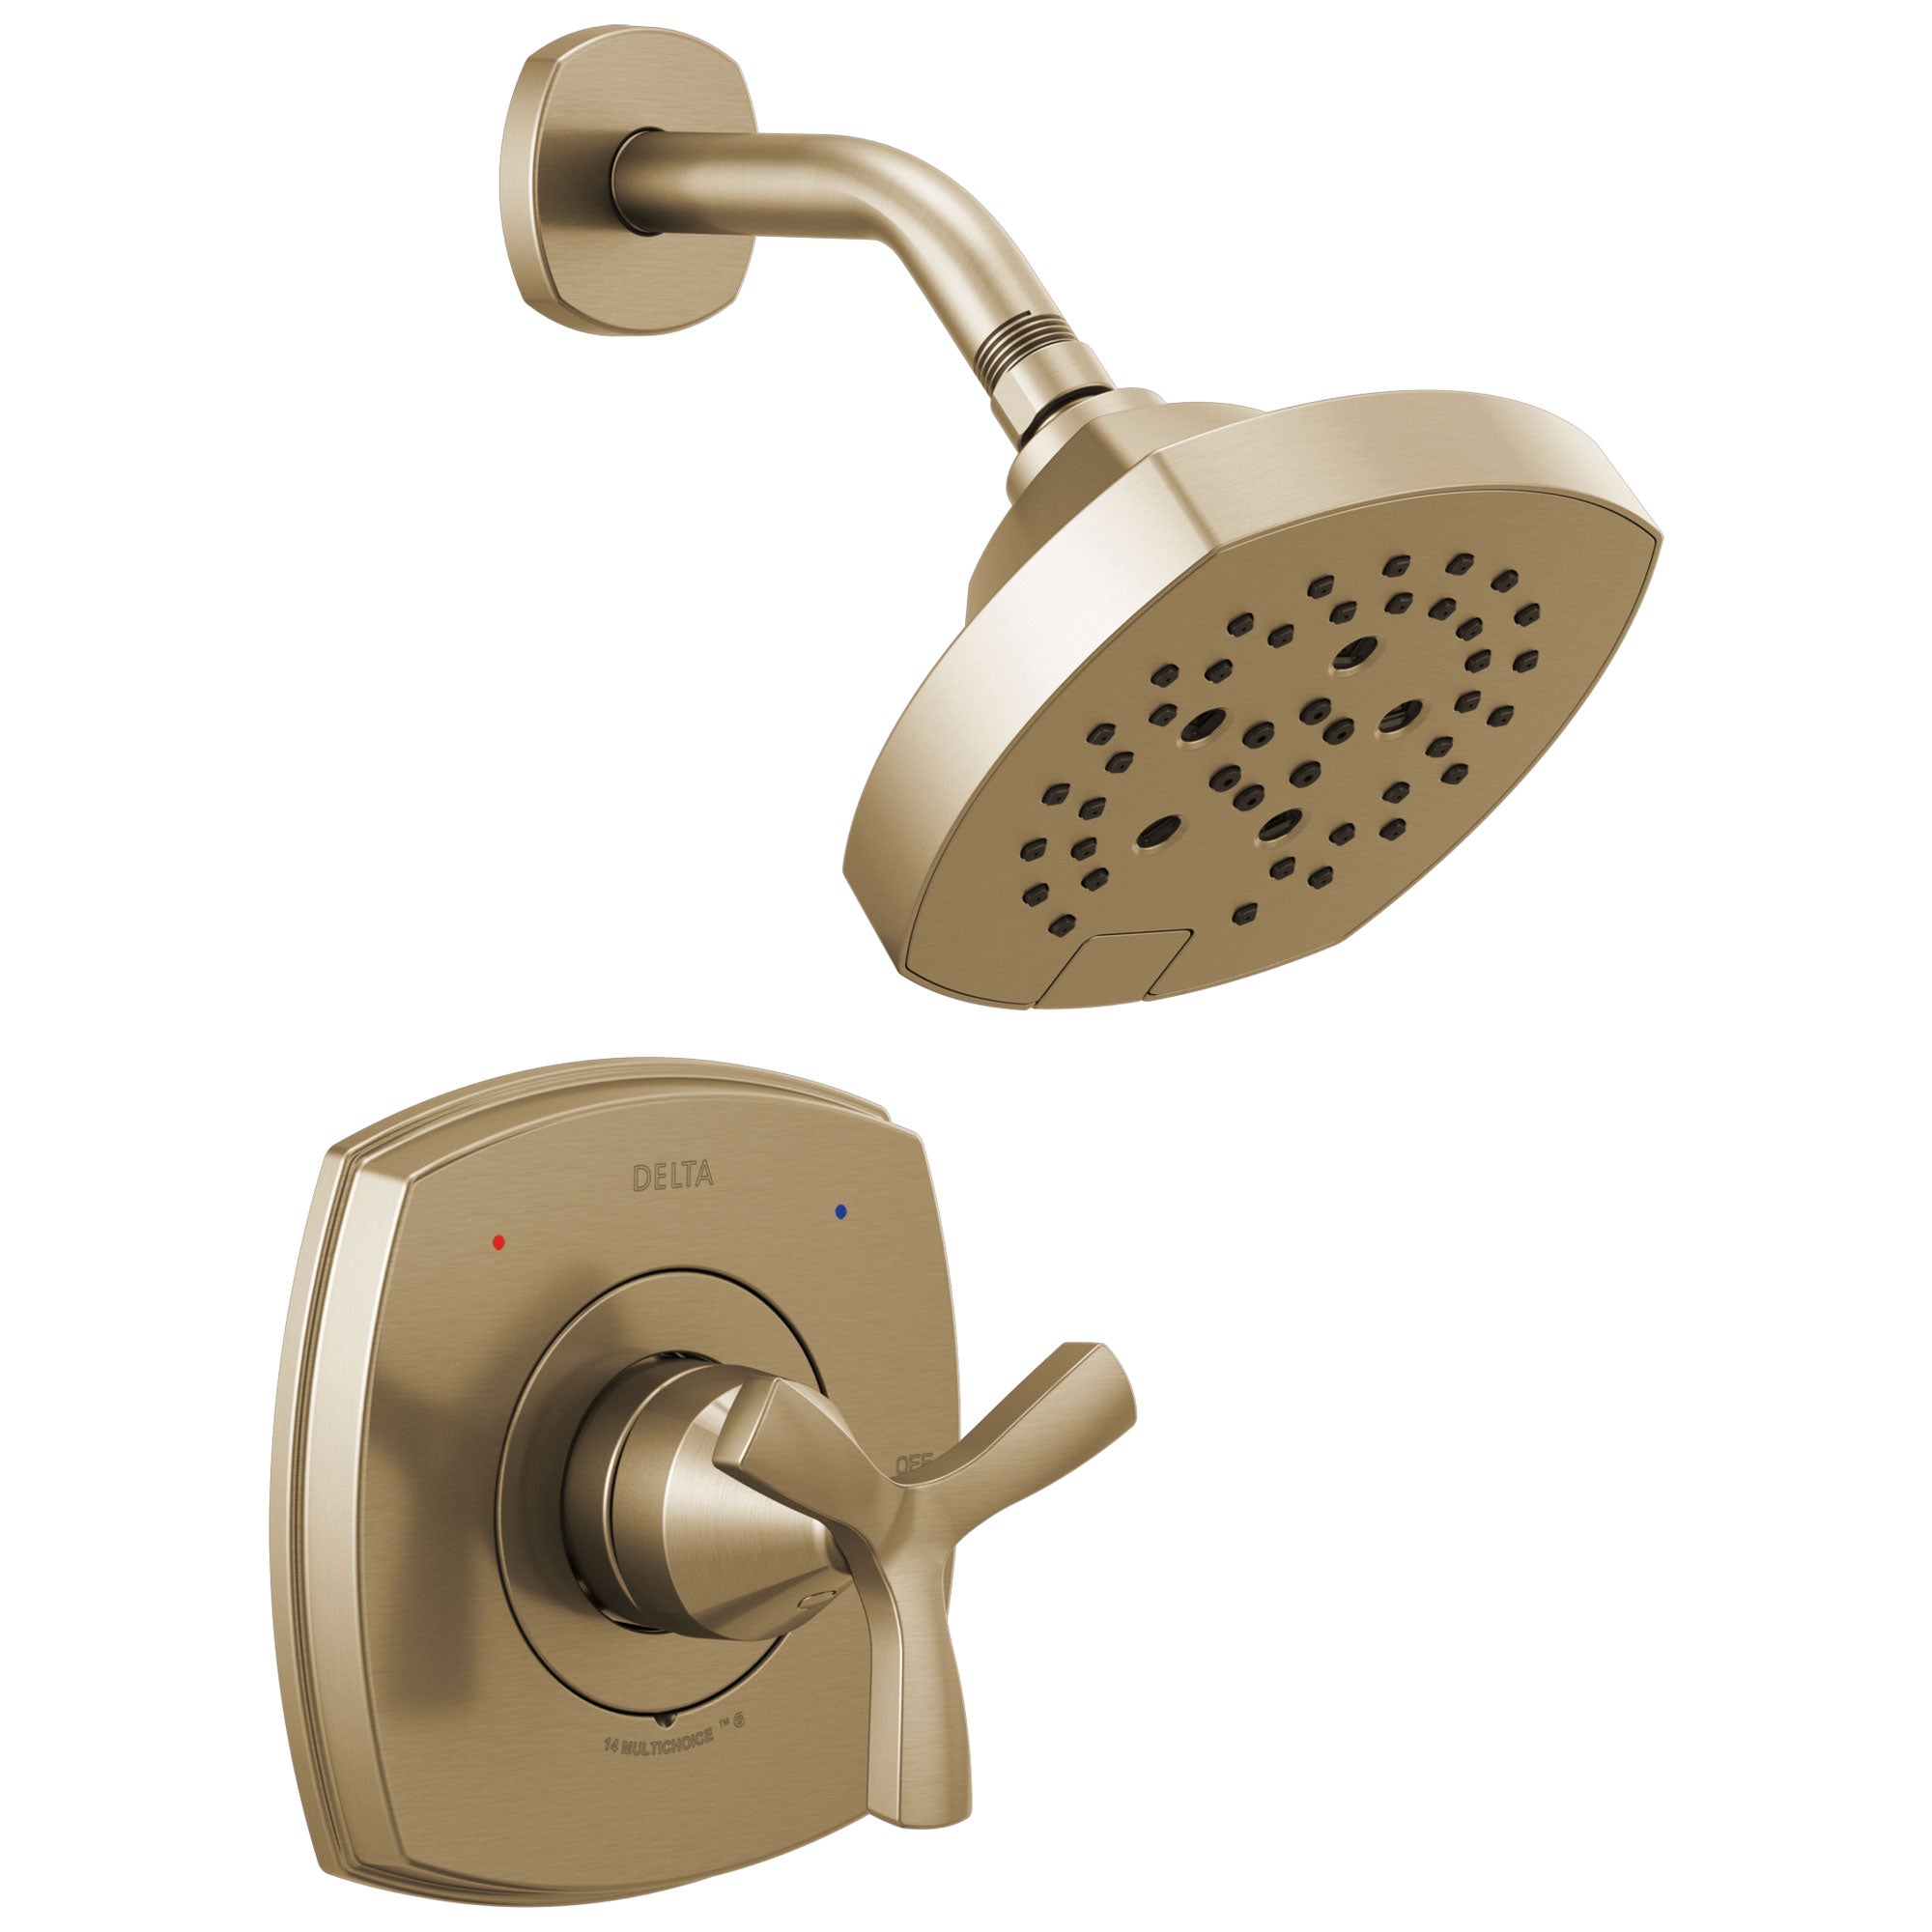 Delta Stryke Champagne Bronze Finish 14 Series Shower Only Faucet Includes Helo Cross Handle, Cartridge, and Rough-in Valve with Stops D3496V